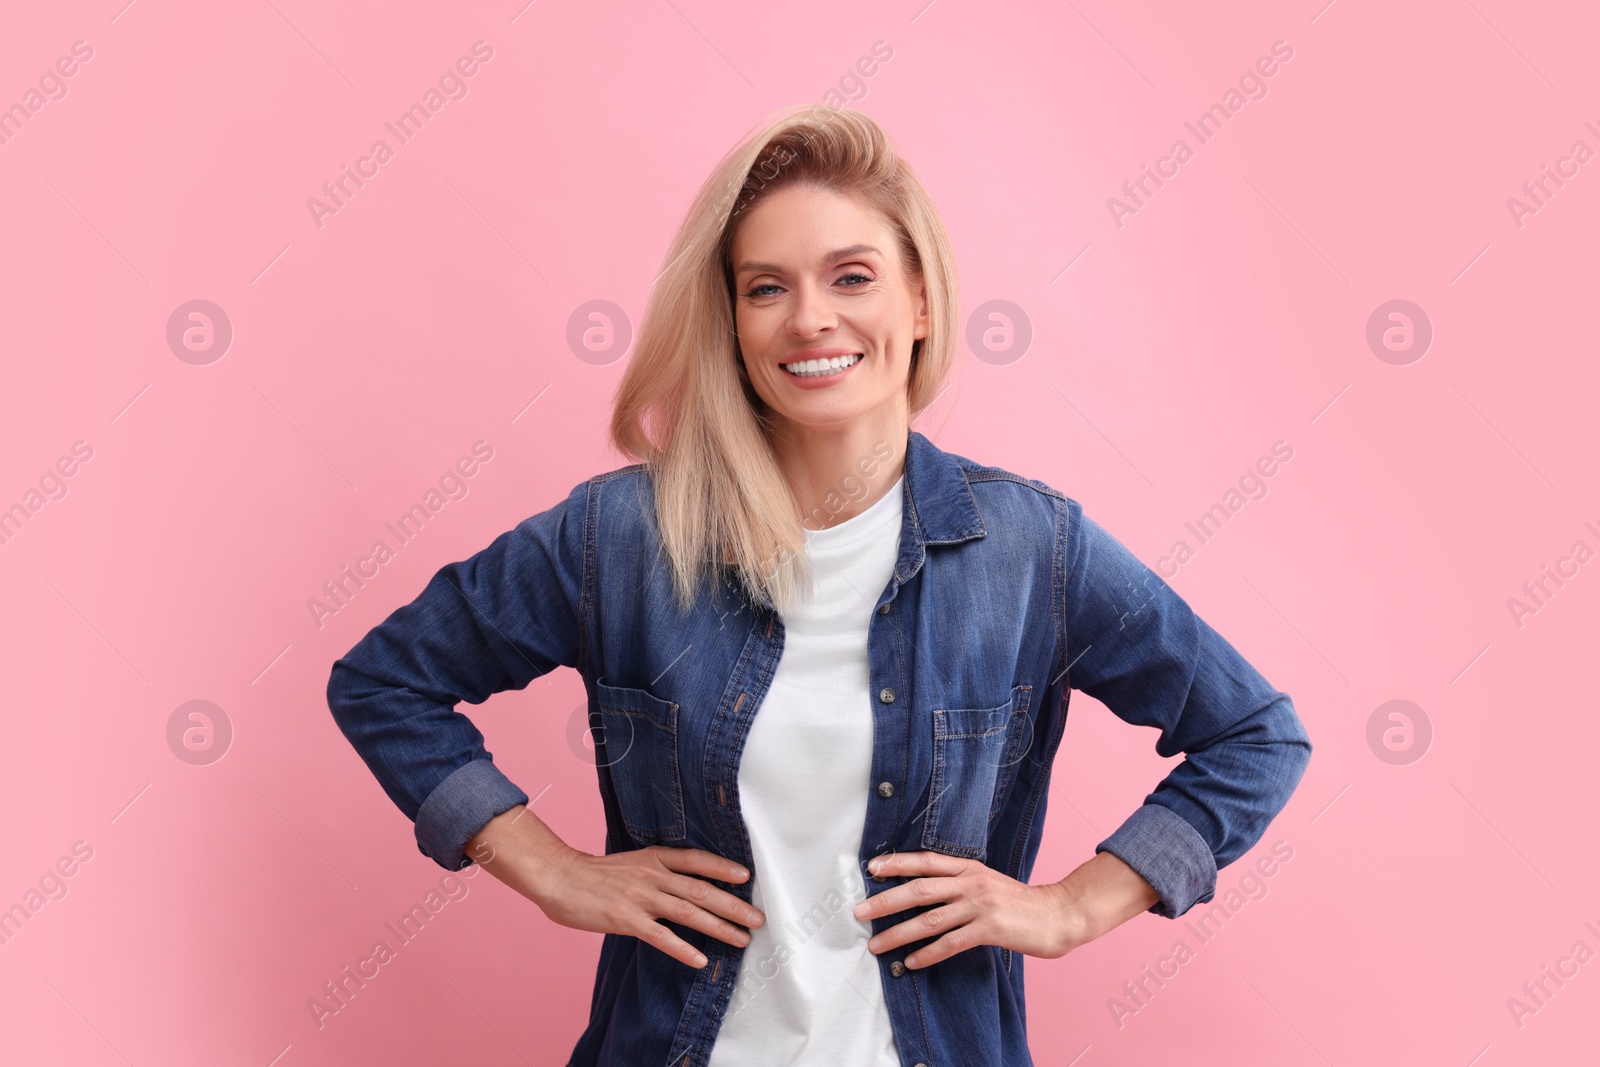 Photo of Portrait of smiling middle aged woman with blonde hair on pink background